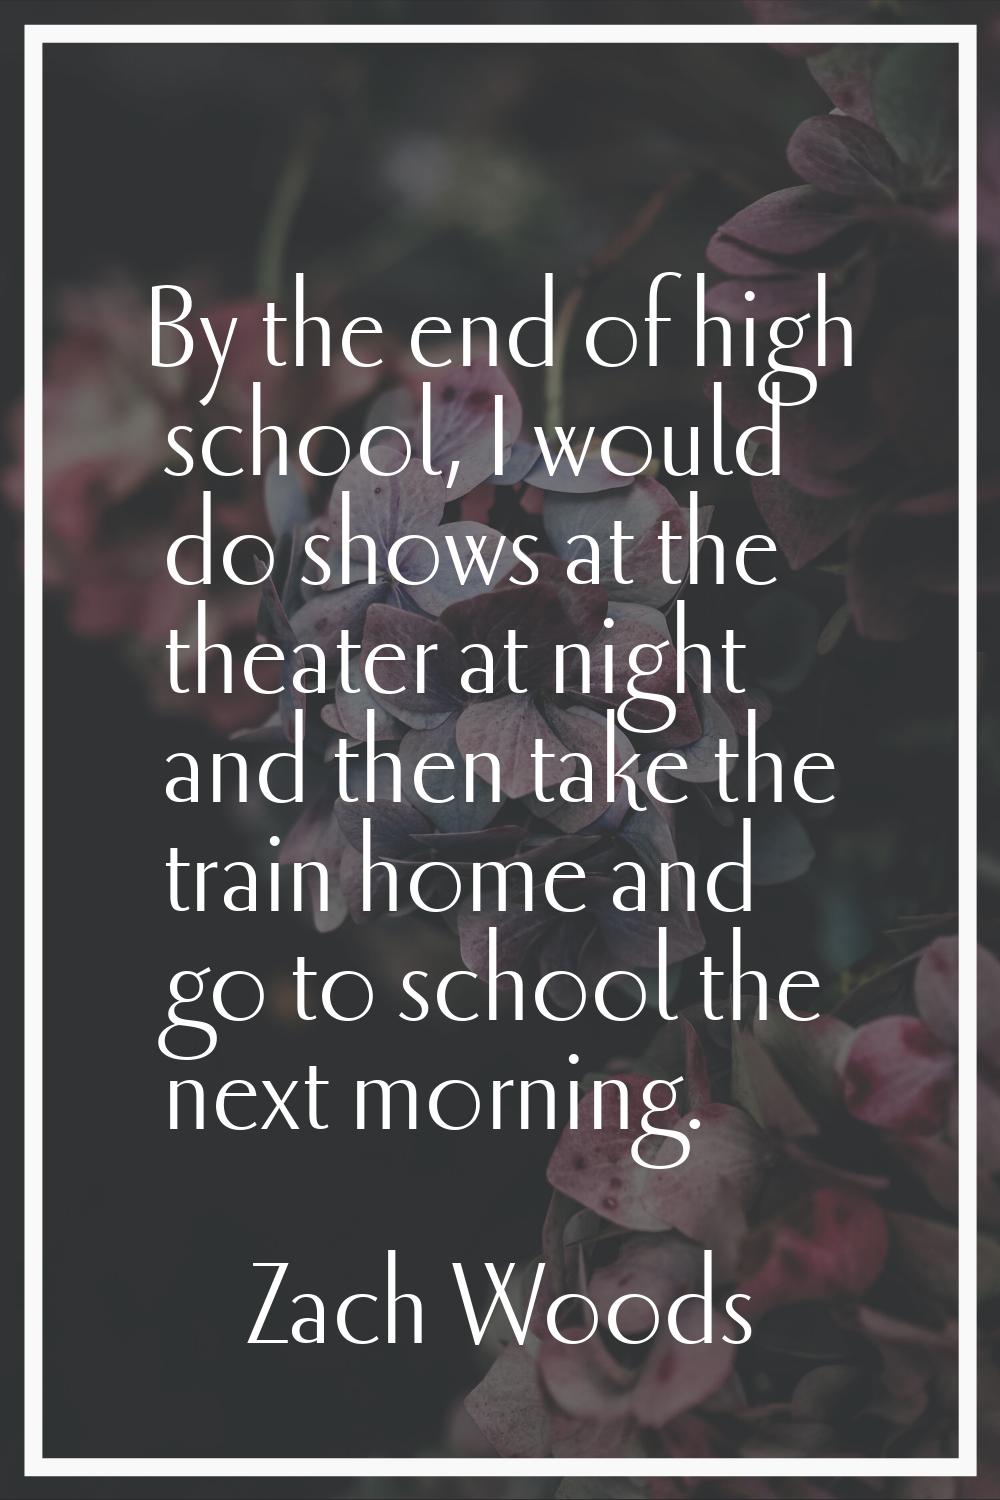 By the end of high school, I would do shows at the theater at night and then take the train home an